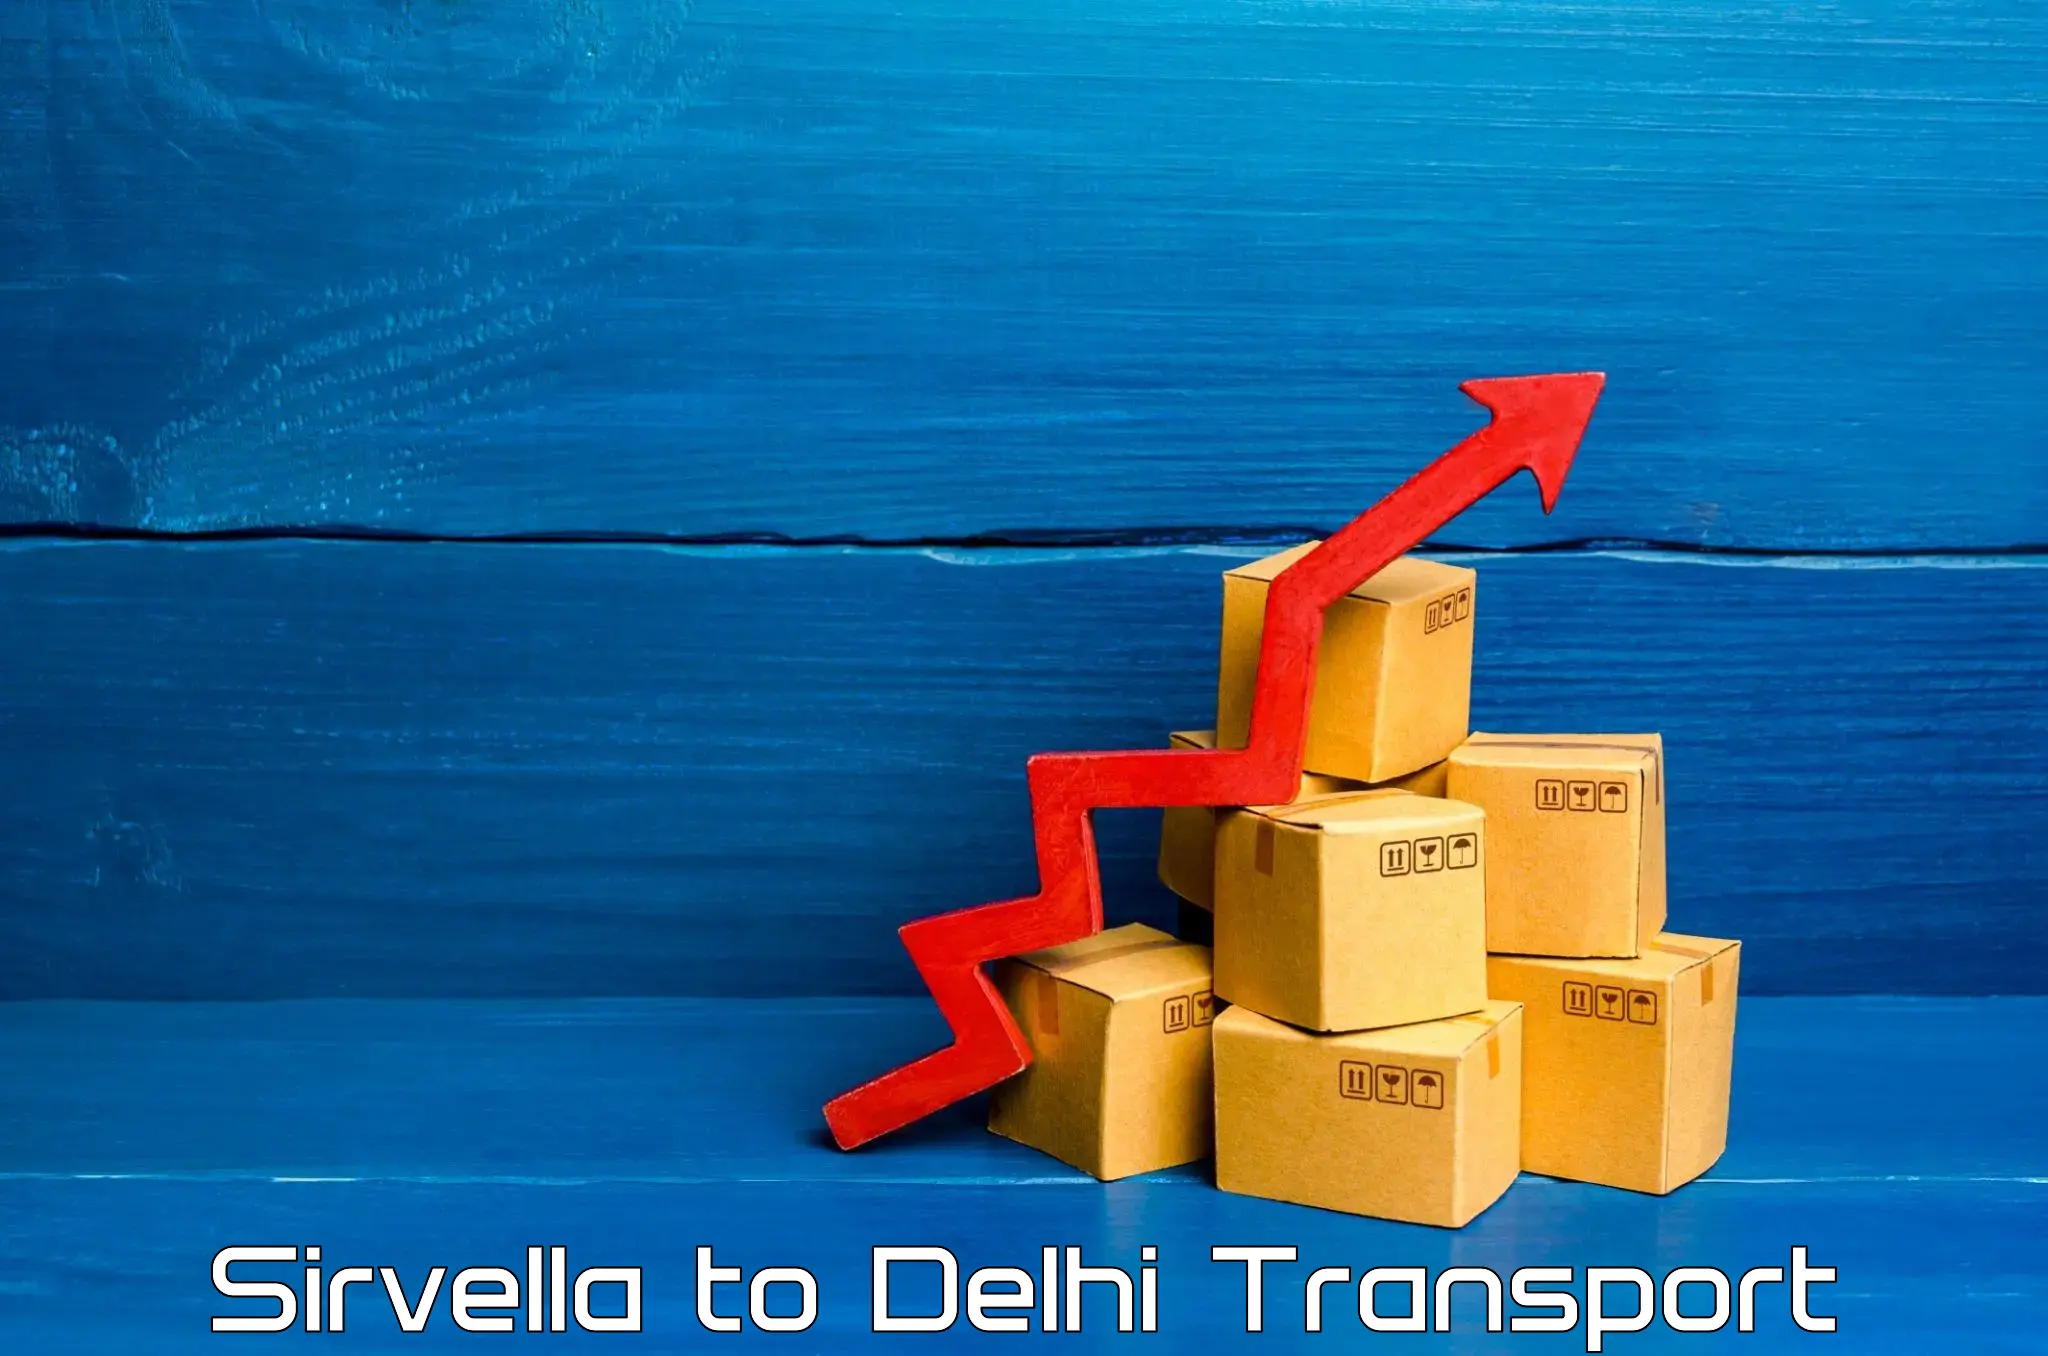 Truck transport companies in India Sirvella to Lodhi Road